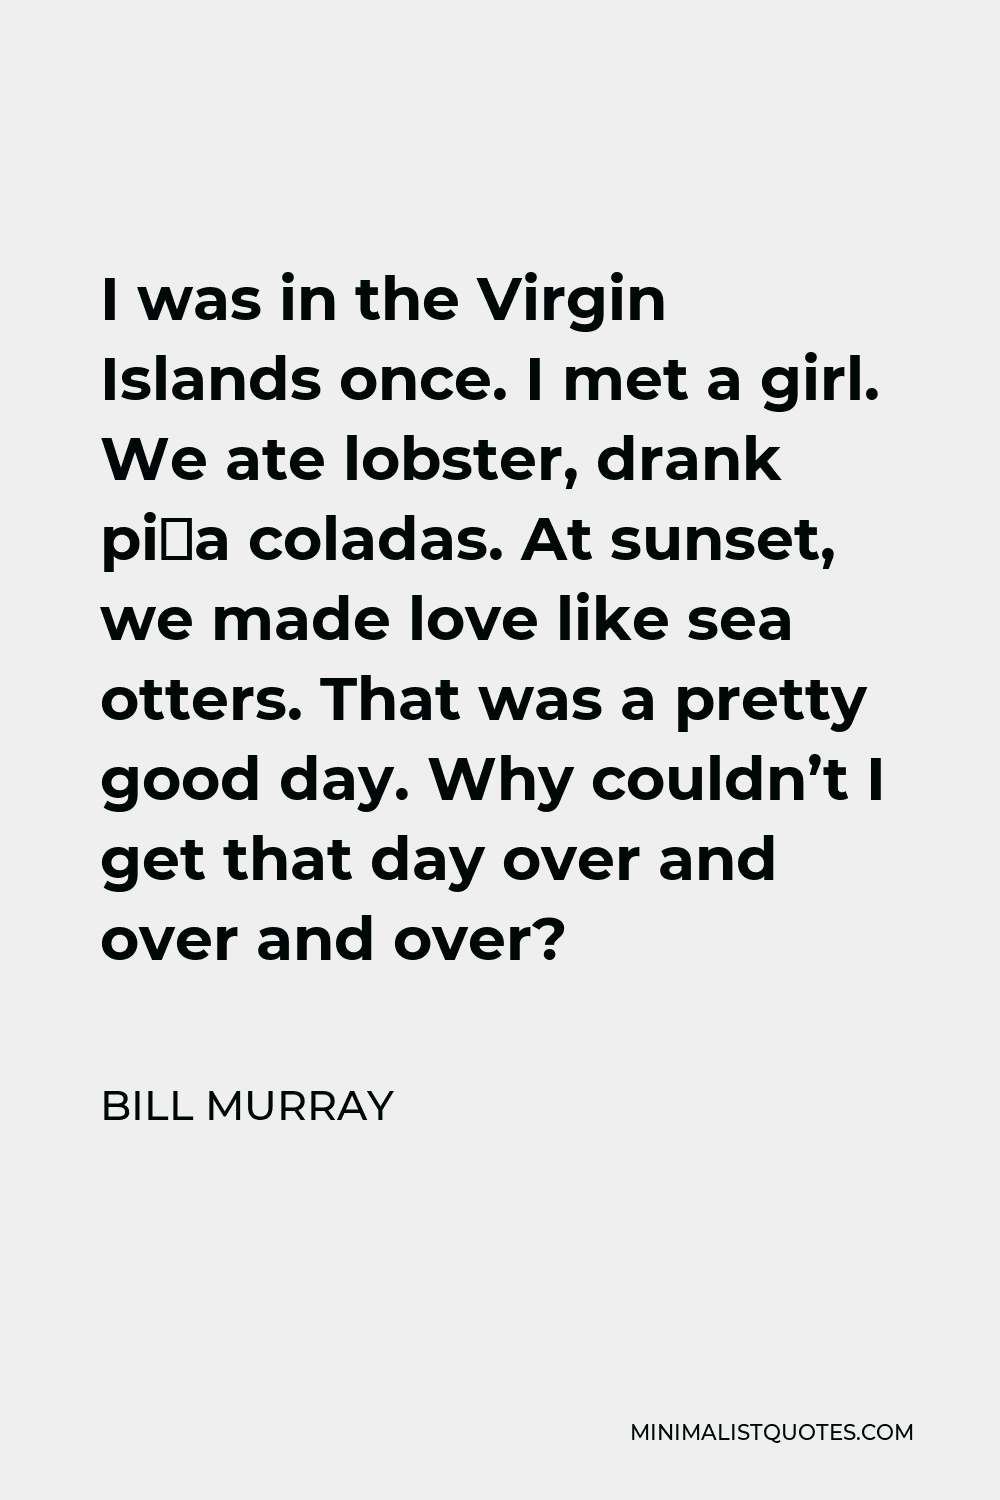 Bill Murray Quote - I was in the Virgin Islands once. I met a girl. We ate lobster, drank piña coladas. At sunset, we made love like sea otters. That was a pretty good day. Why couldn’t I get that day over and over and over?